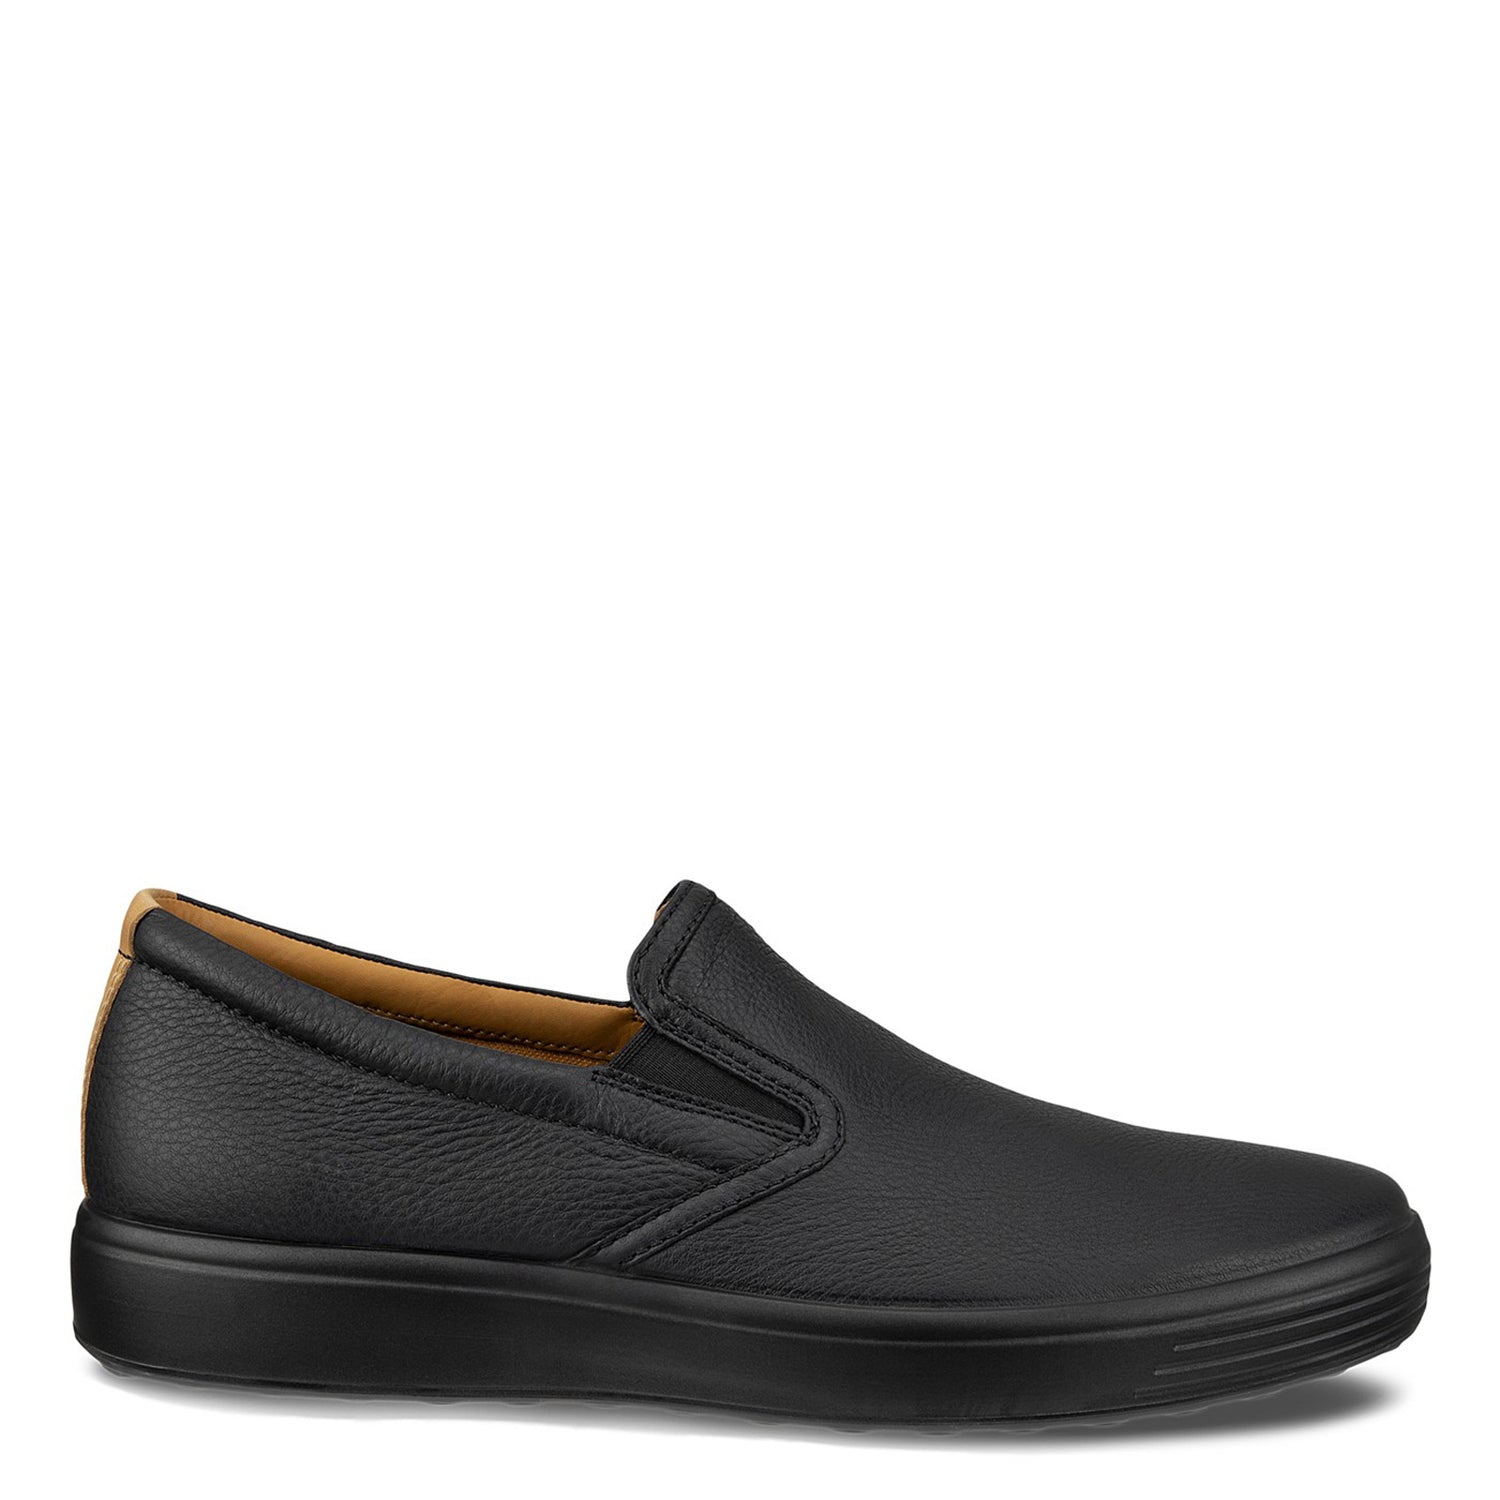 Ecco Leather Upper Shoes for Men